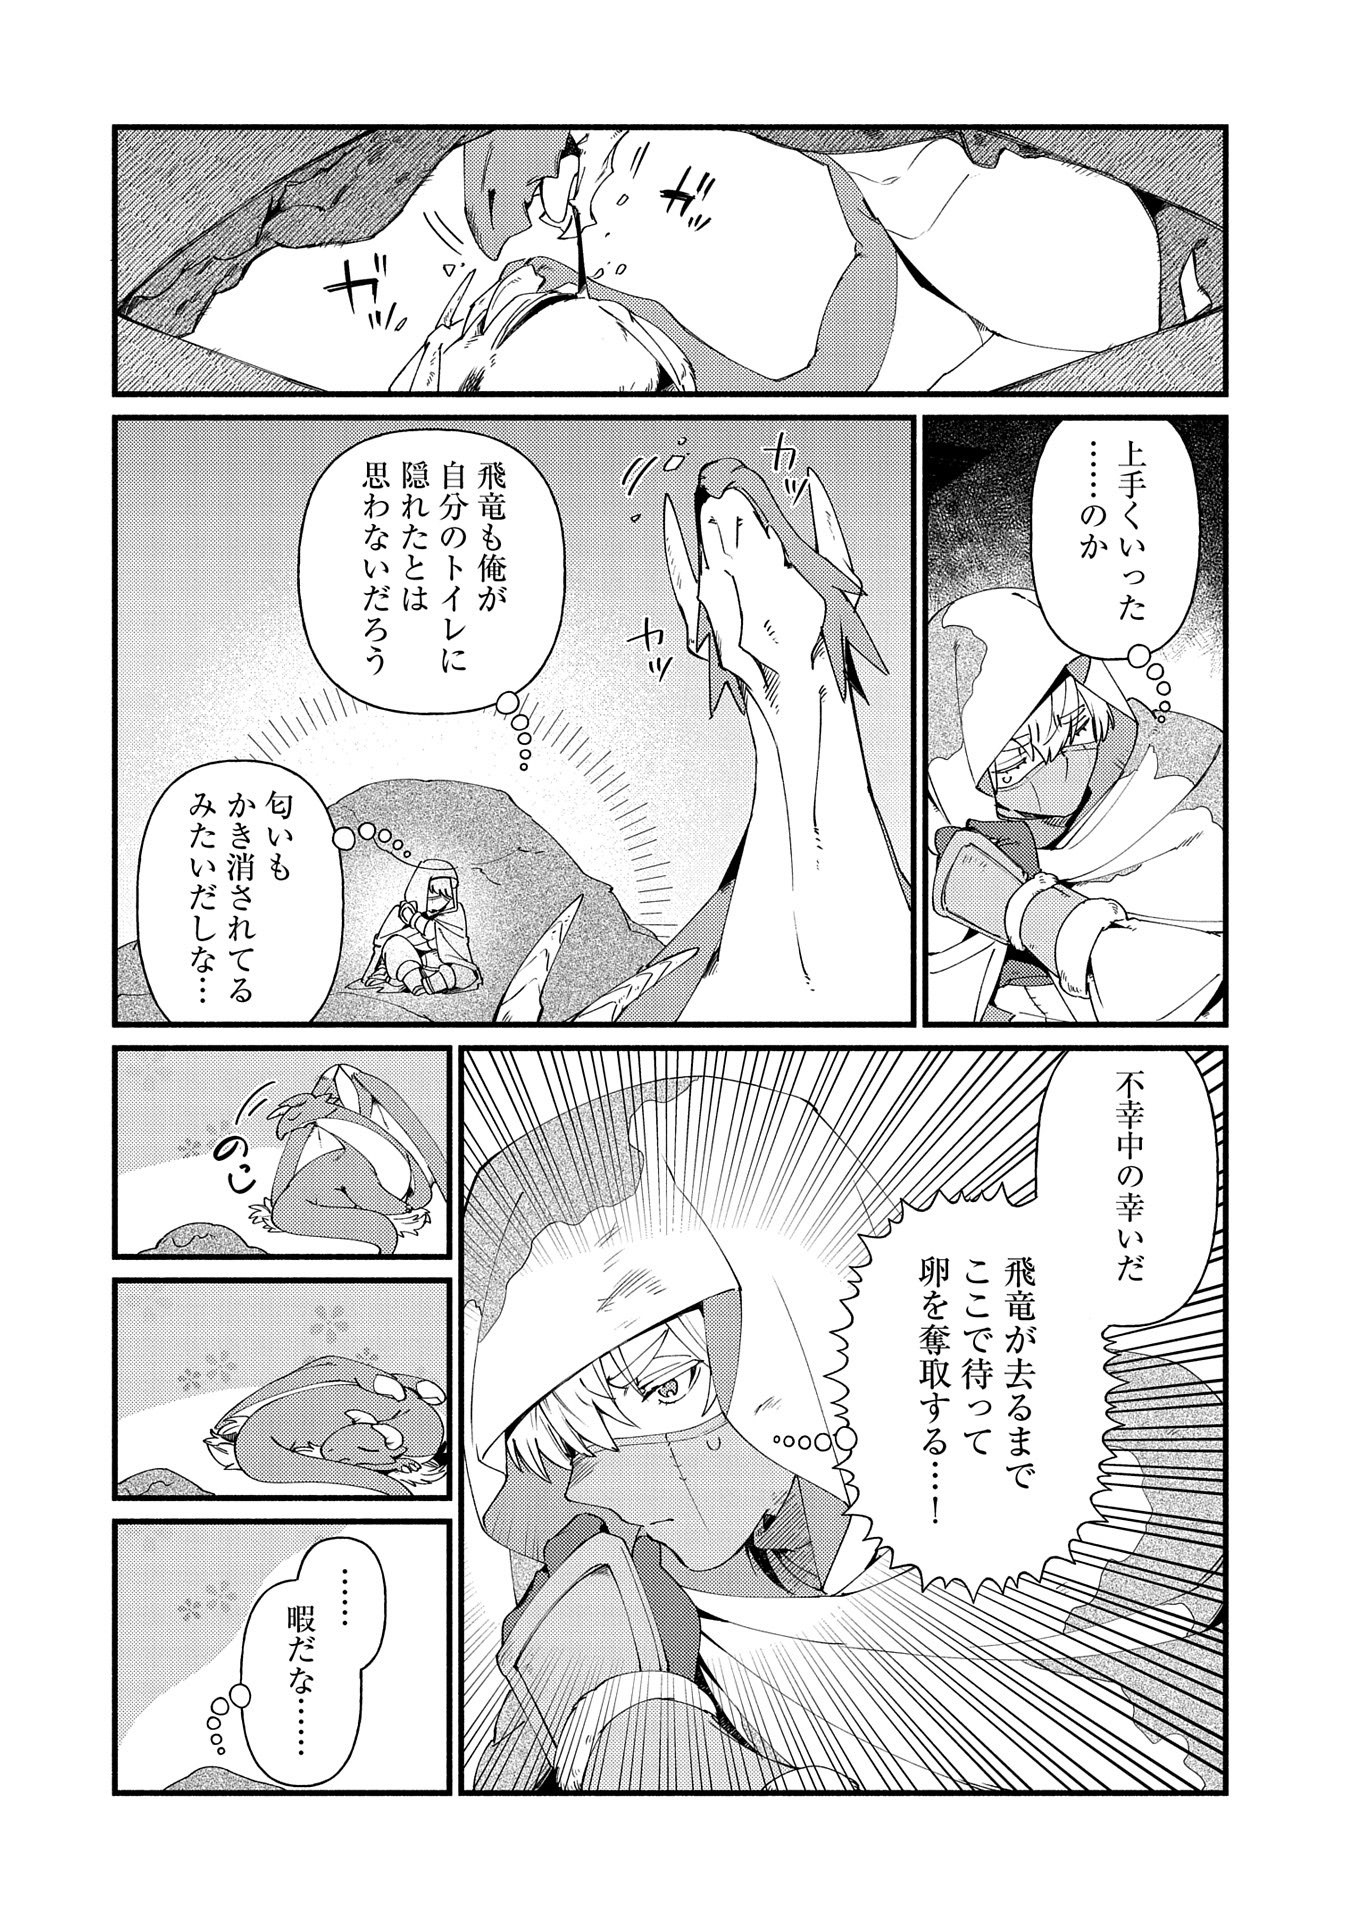 Nord’s Adventure 第11.1話 - Page 4